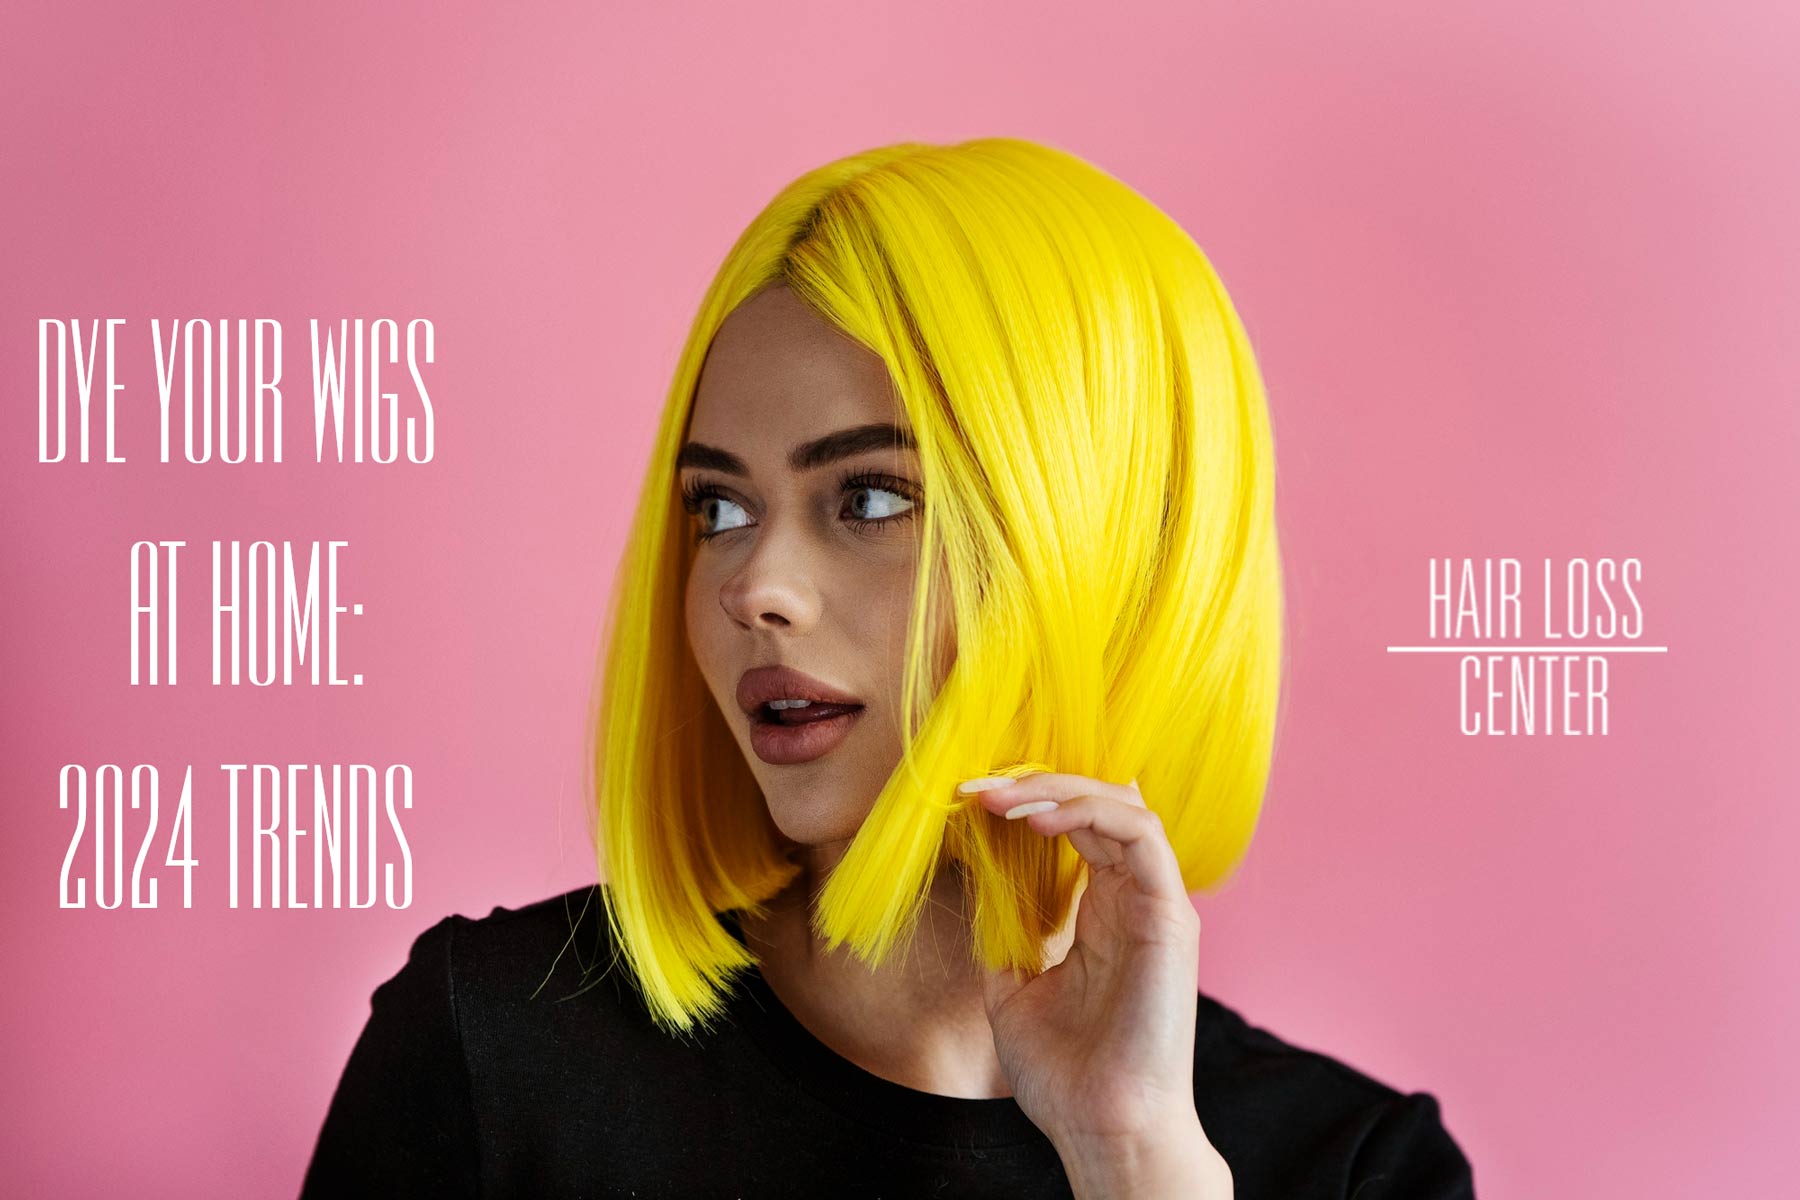 Dye Your Wig at Home to Keep Up with Hair Color Trends in 2024 